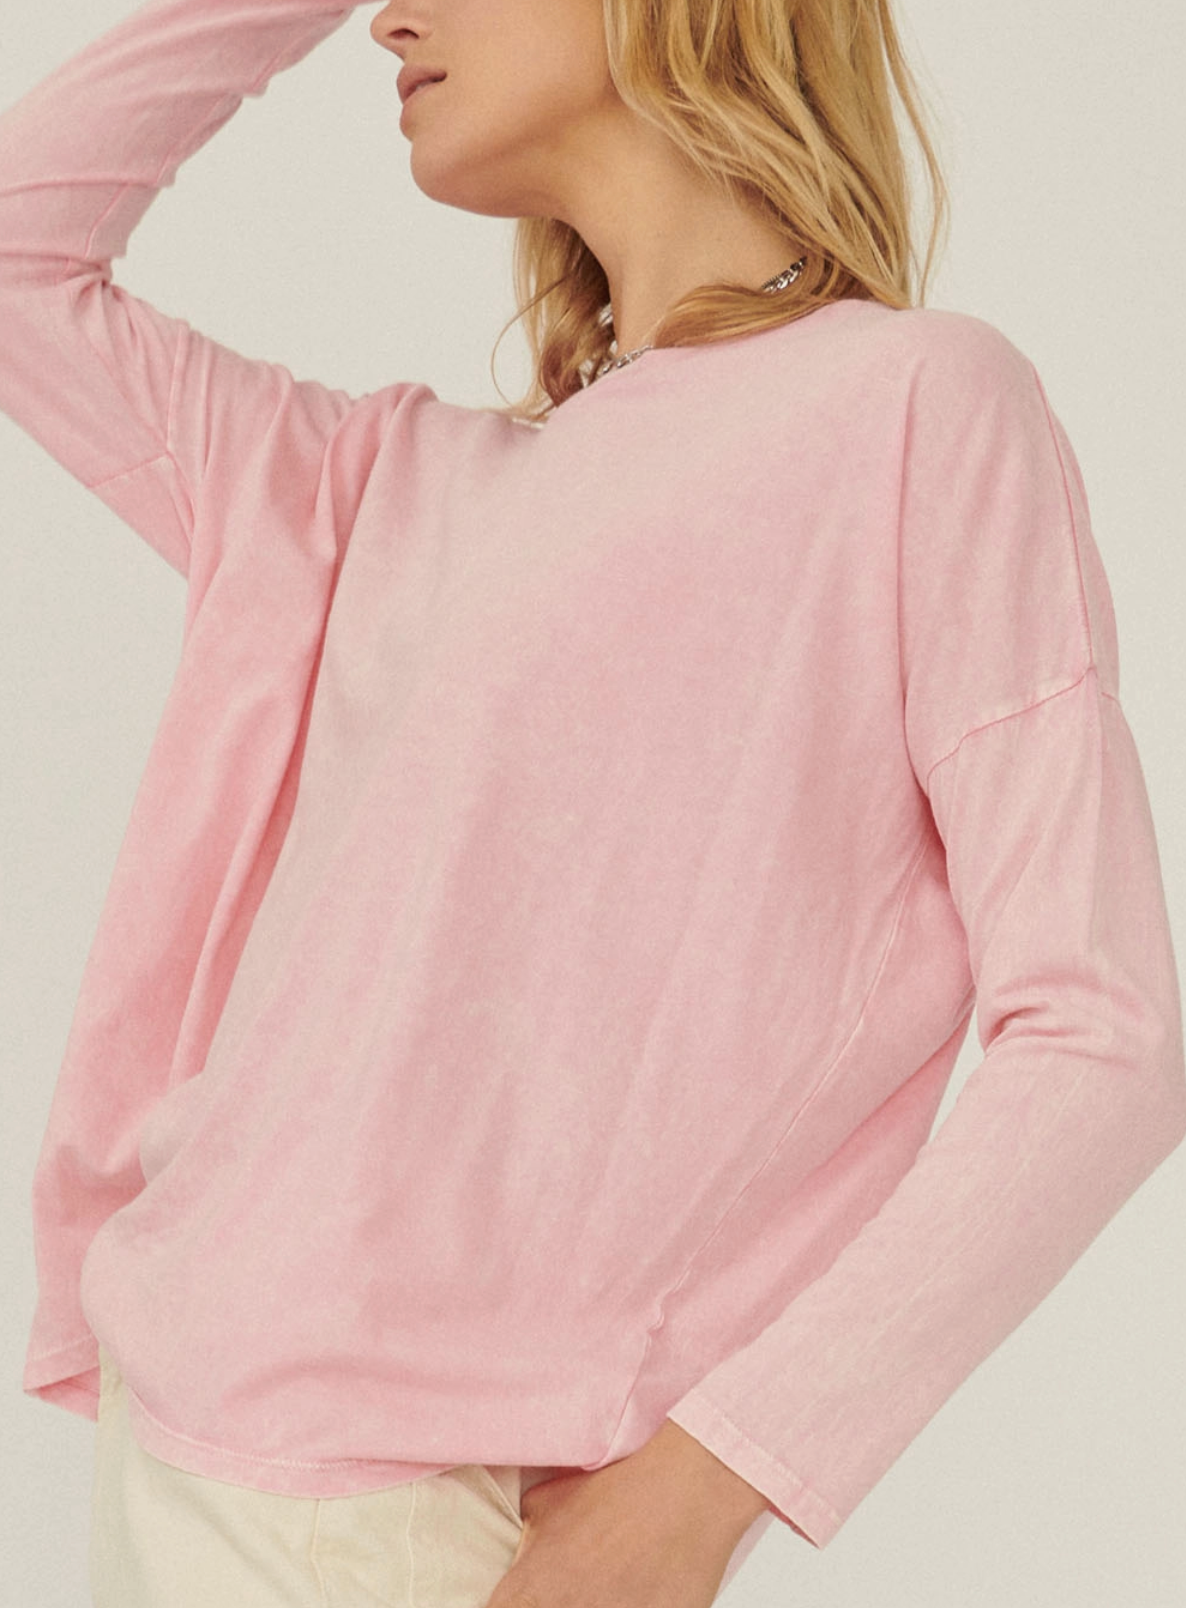 Mineral Washed Oversize Long-Sleeve Tee in Pink - The Street Boutique 